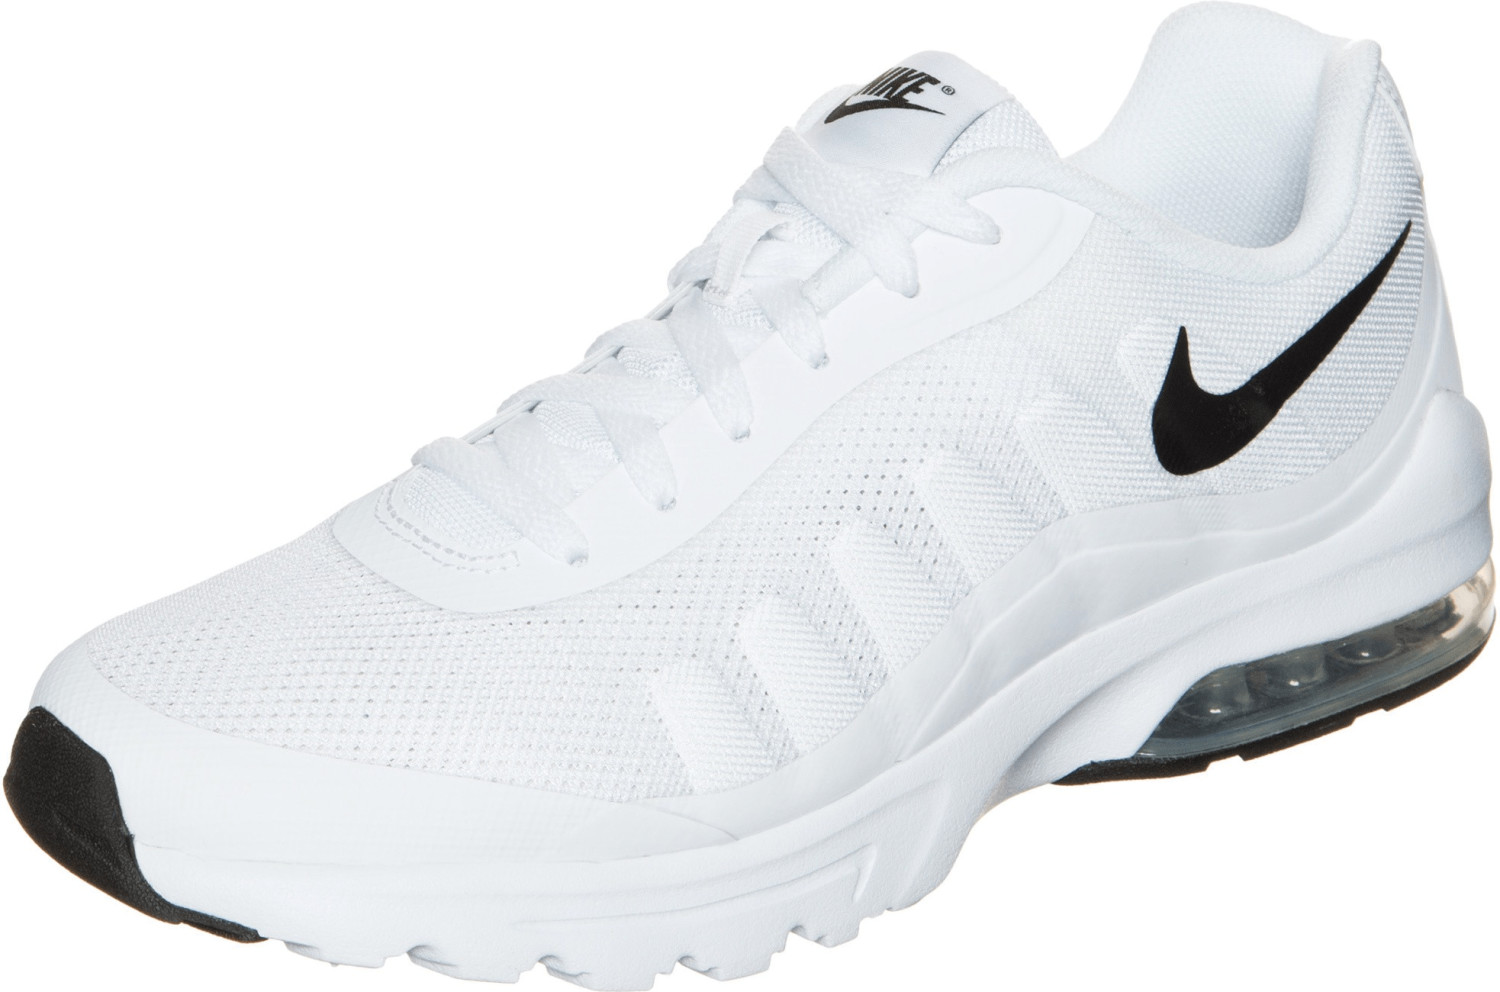 Buy Nike Air Max Invigor white/black from £79.99 (Today) – Best Deals ...